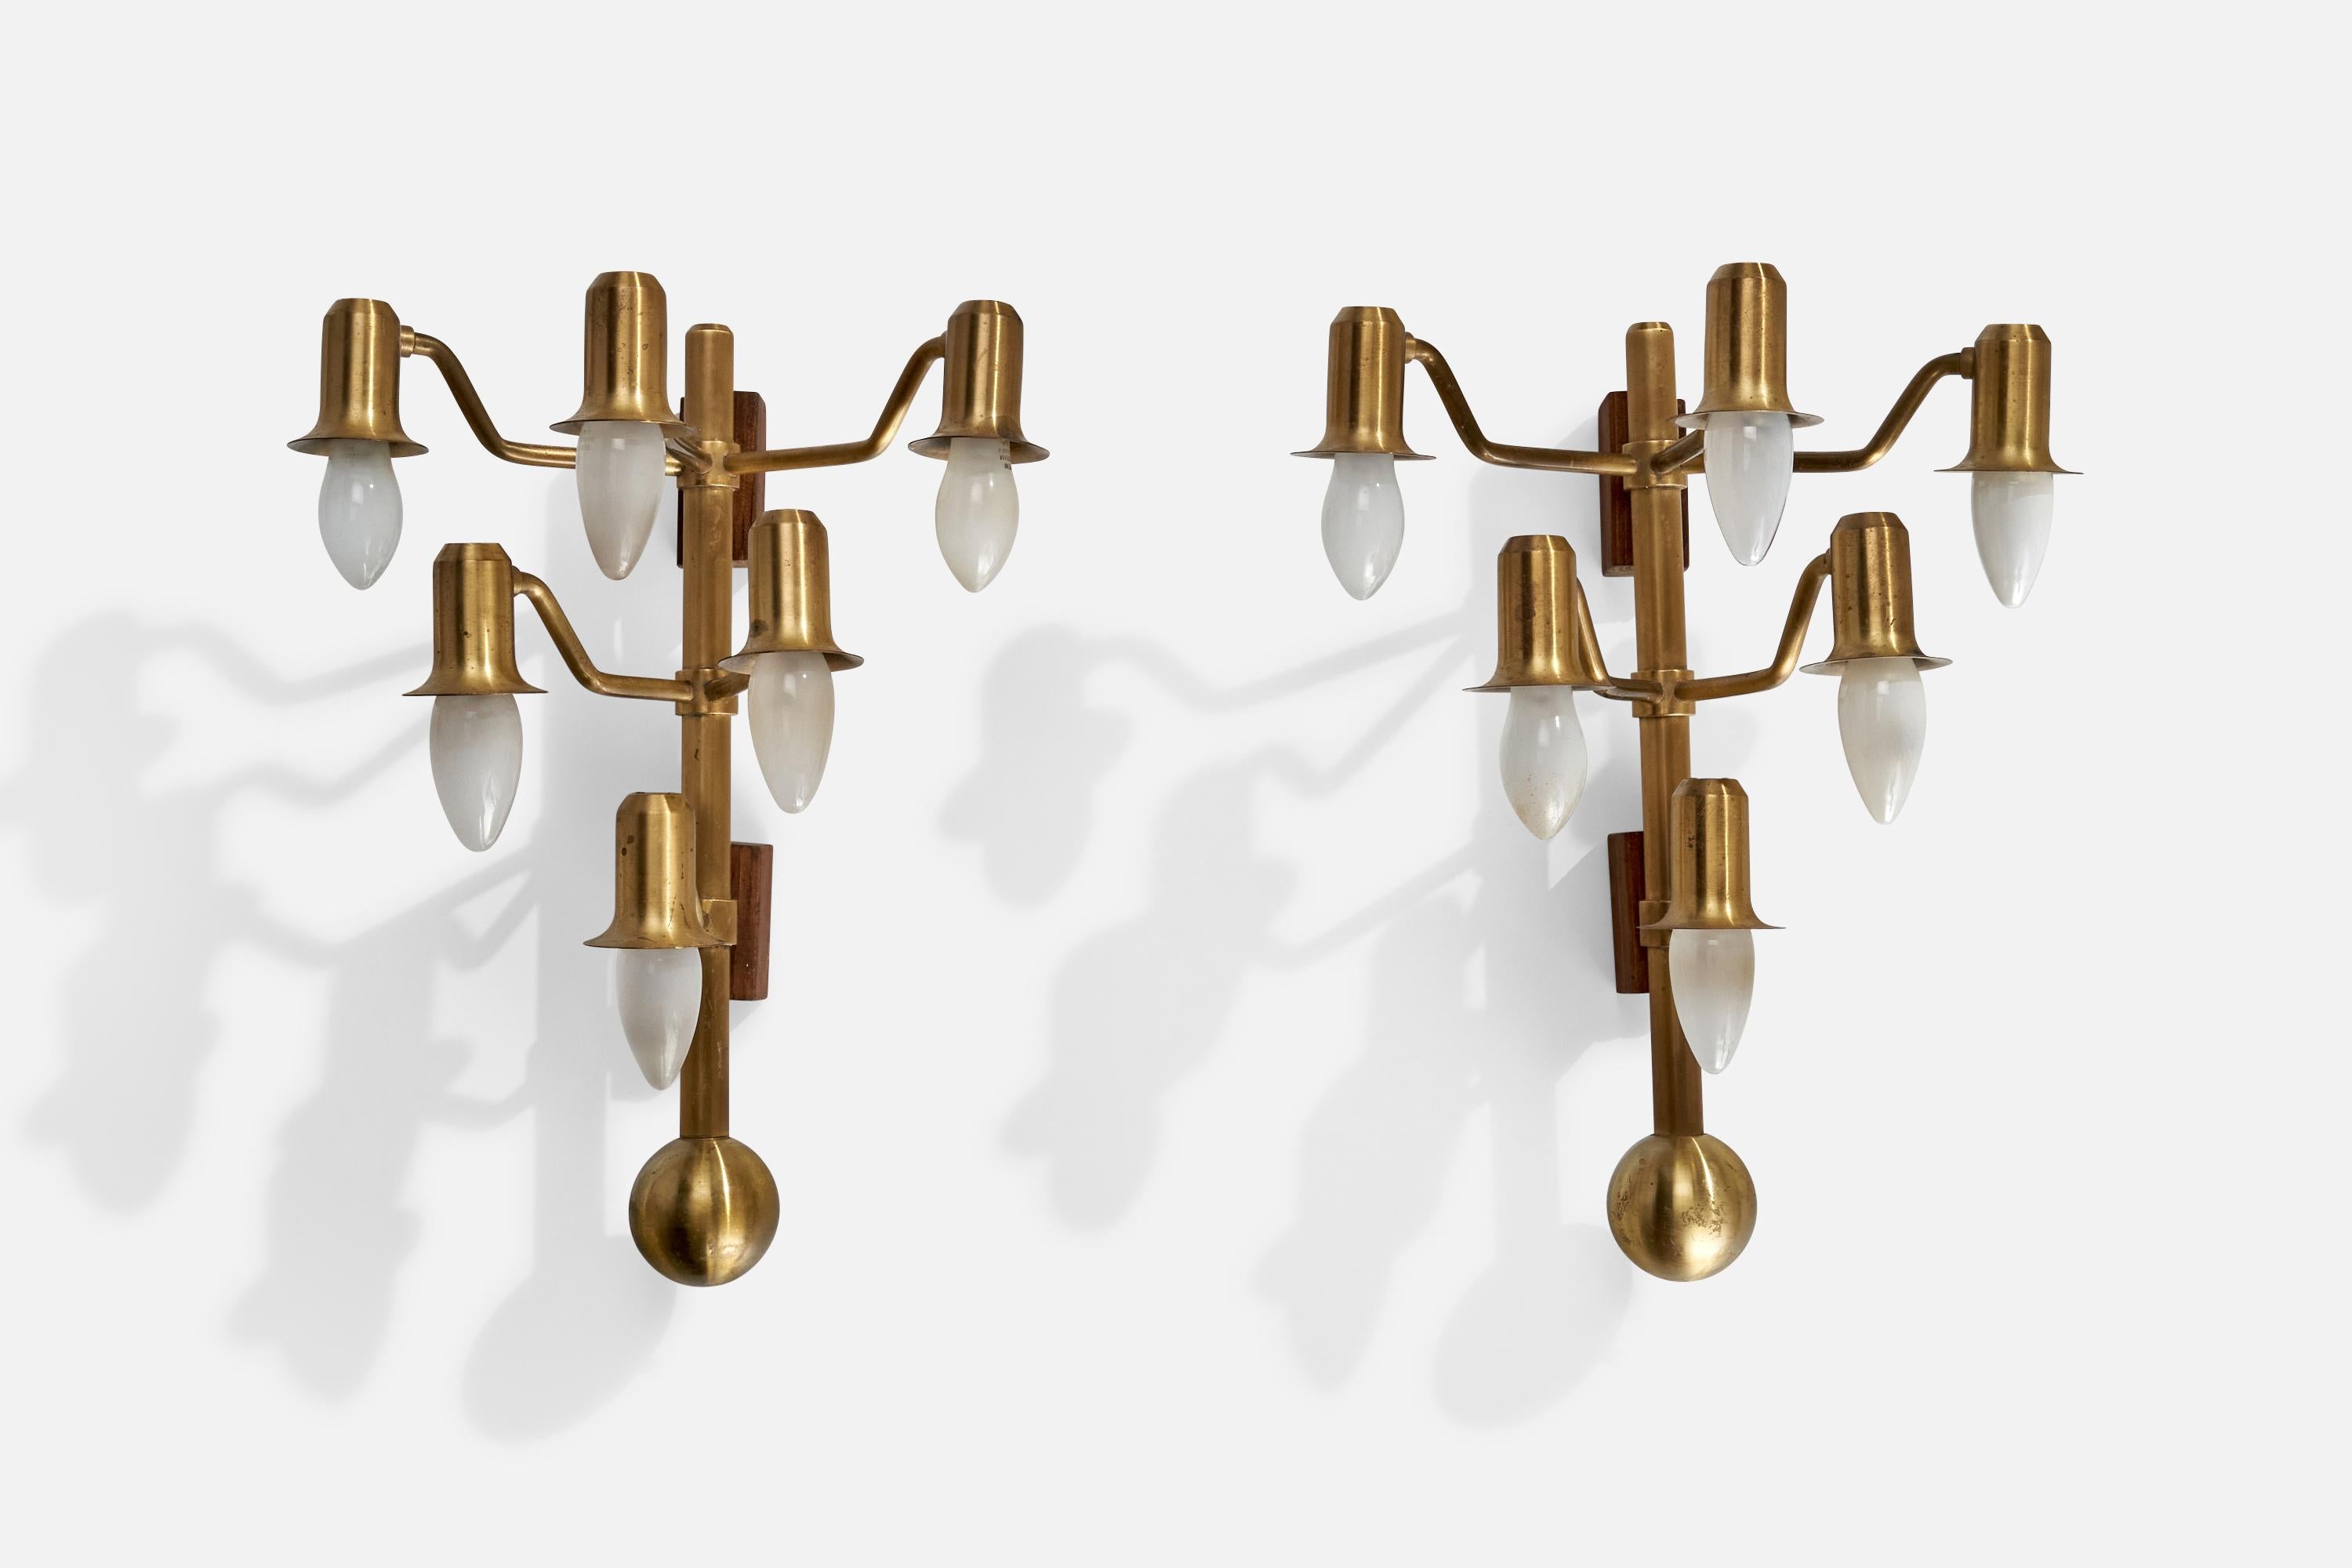 A pair of brass and wood wall lights designed and produced in Denmark, 1940s.

Lamp is configured for plug-in with cord feeding from brass sphere at bottom of stem.

Overall Dimensions (inches): 17” H x 17.5” W x 7.75” D
Back Plate Dimensions